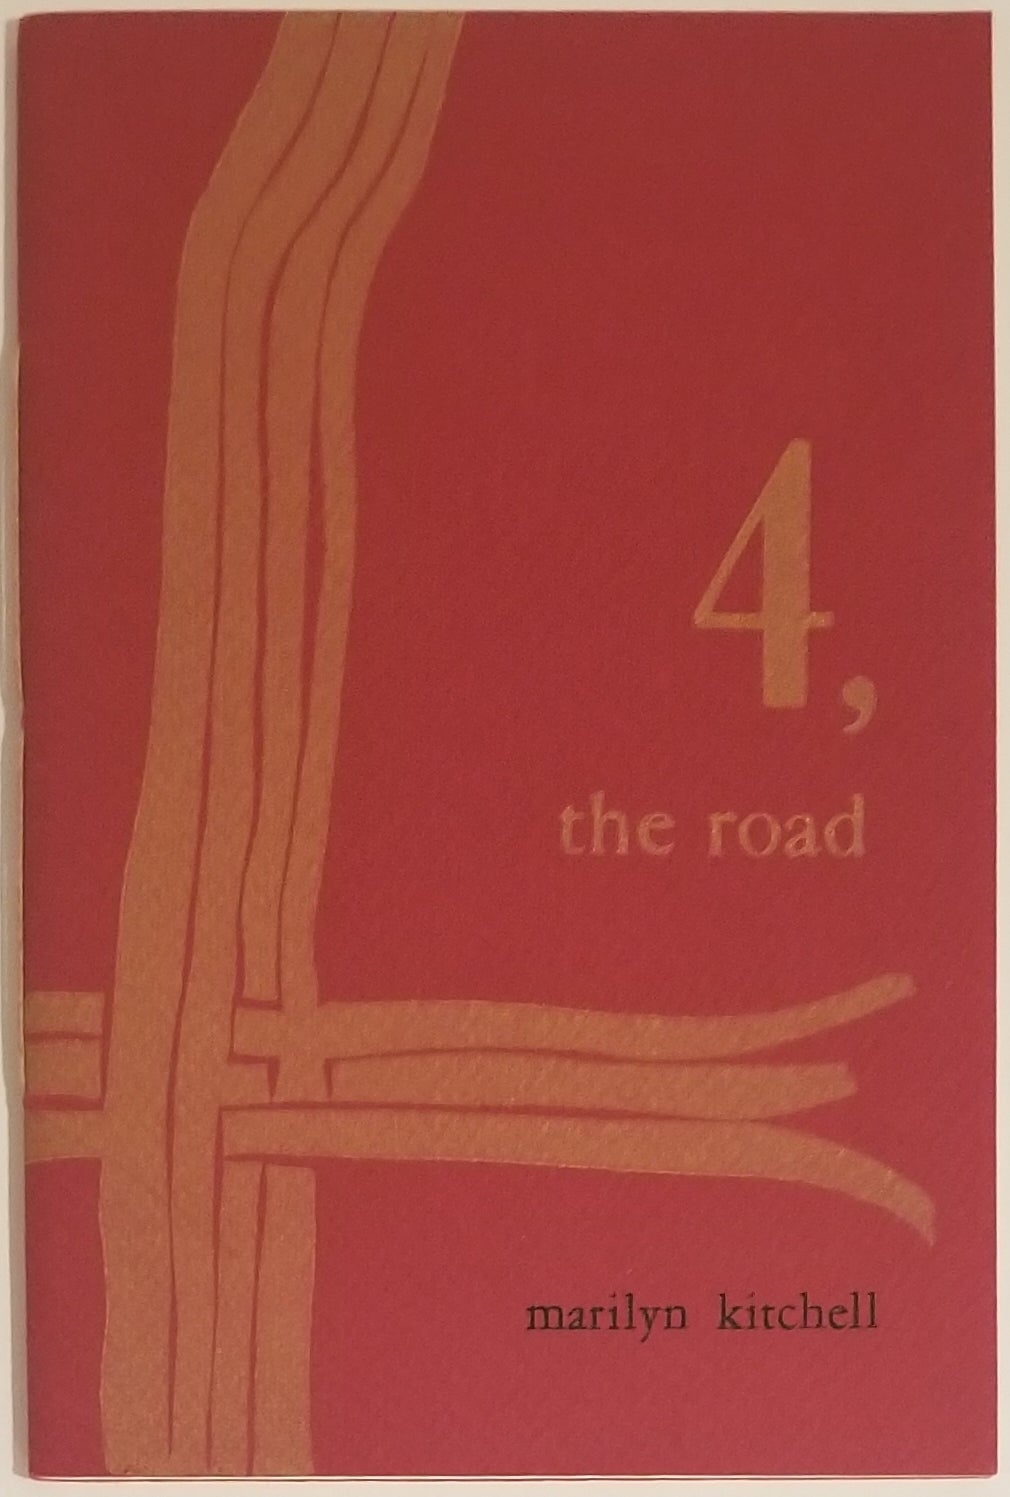 [Book #29045] 4, THE ROAD. Marilyn Kitchell.